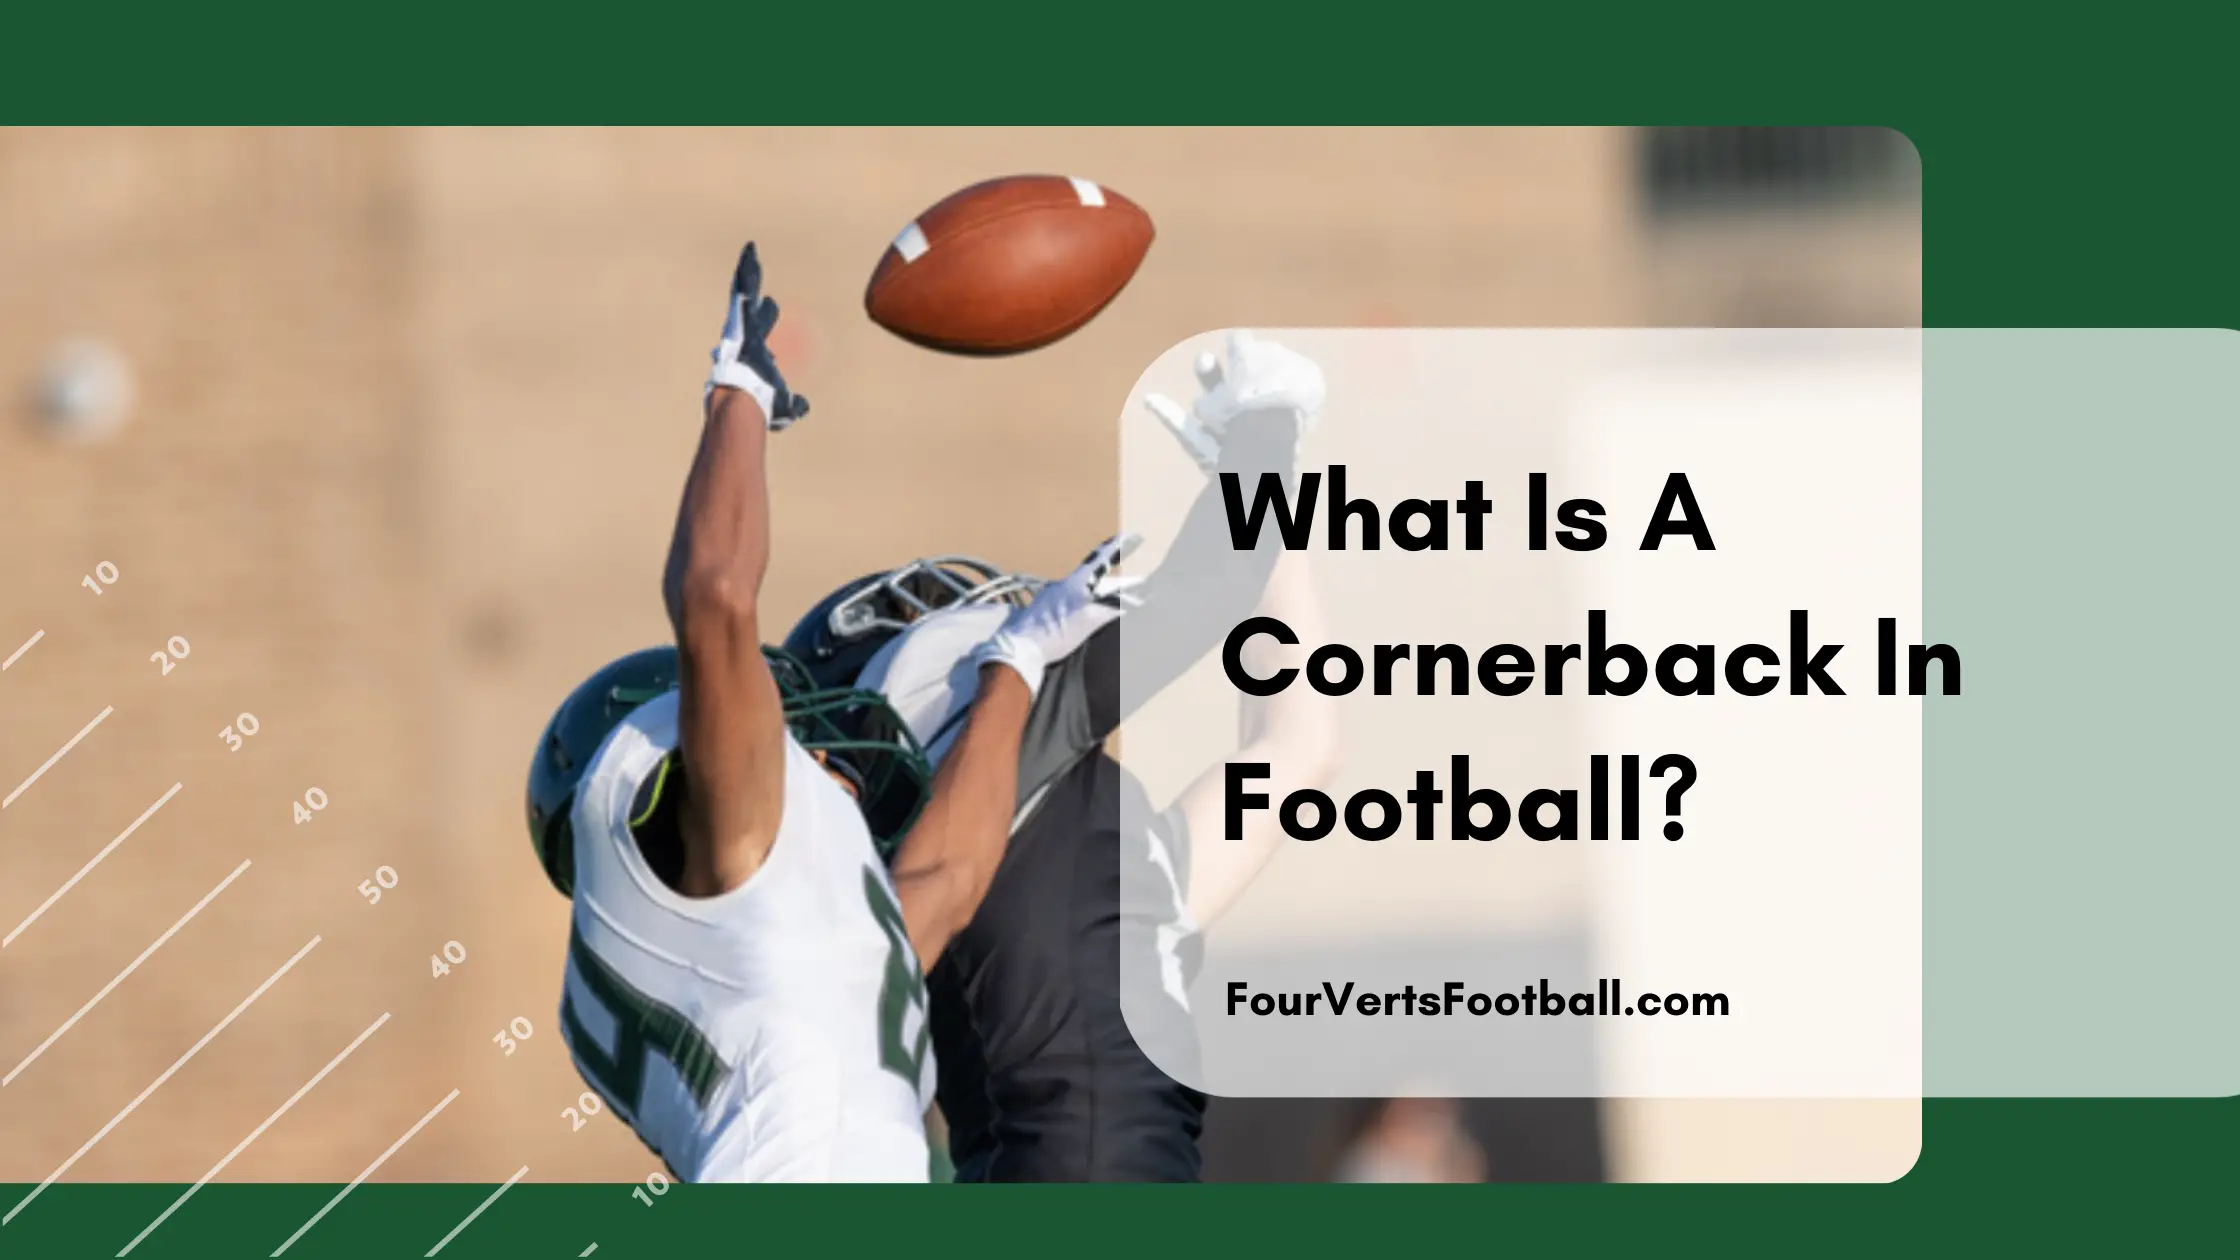 What Is A Cornerback In Football